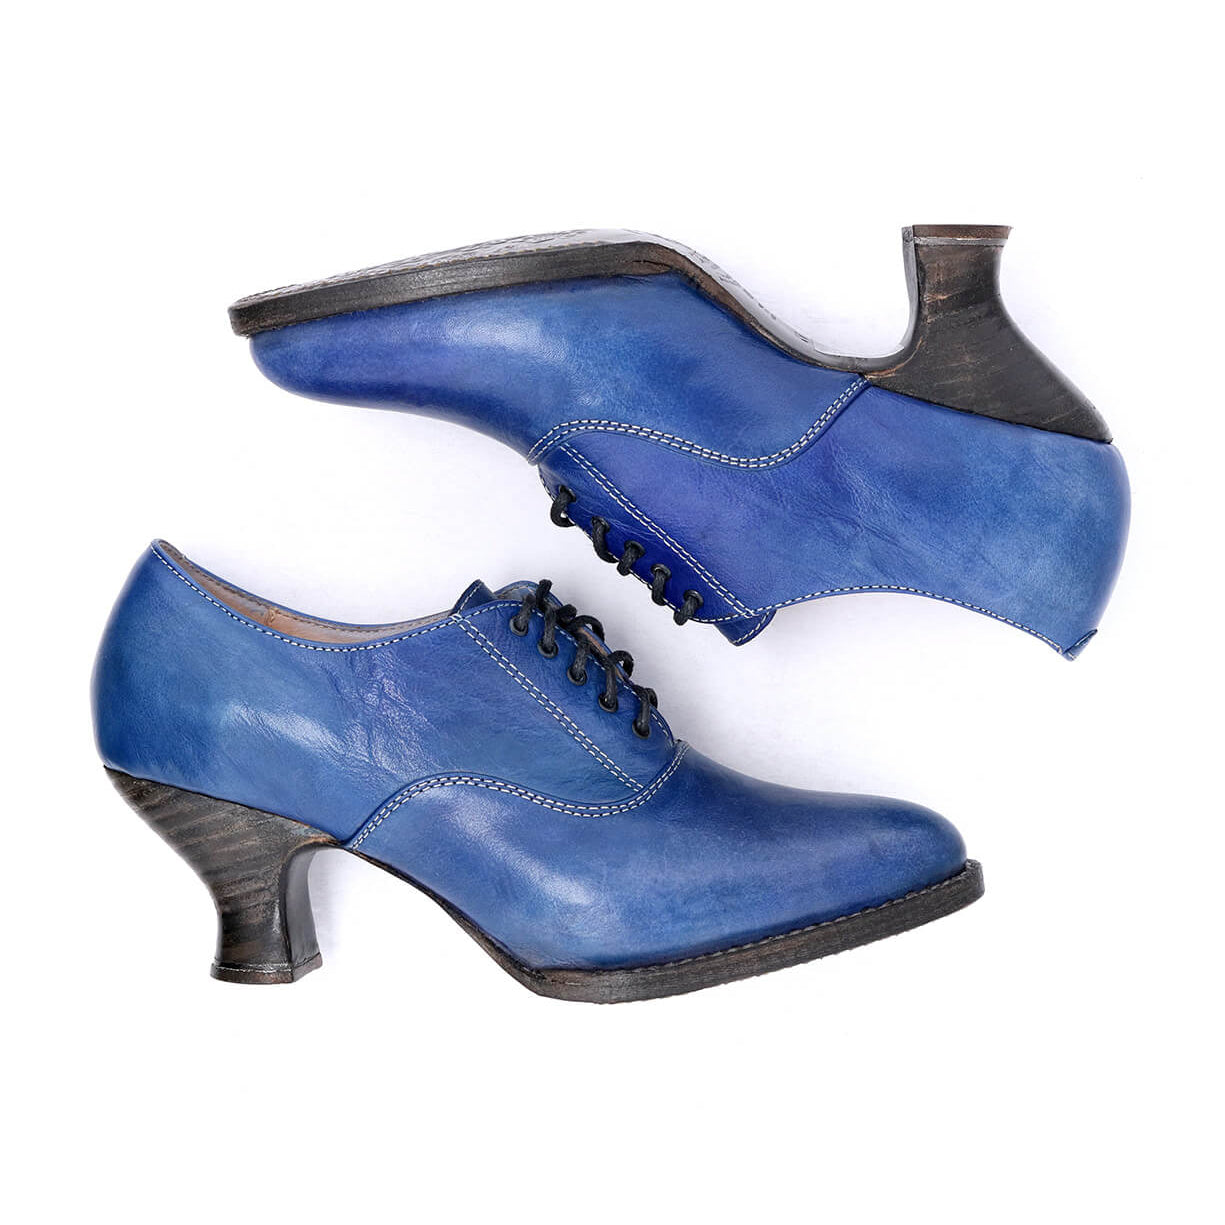 A pair of Janet Oak Tree Farms blue leather shoes with a lace-up front on a white background.